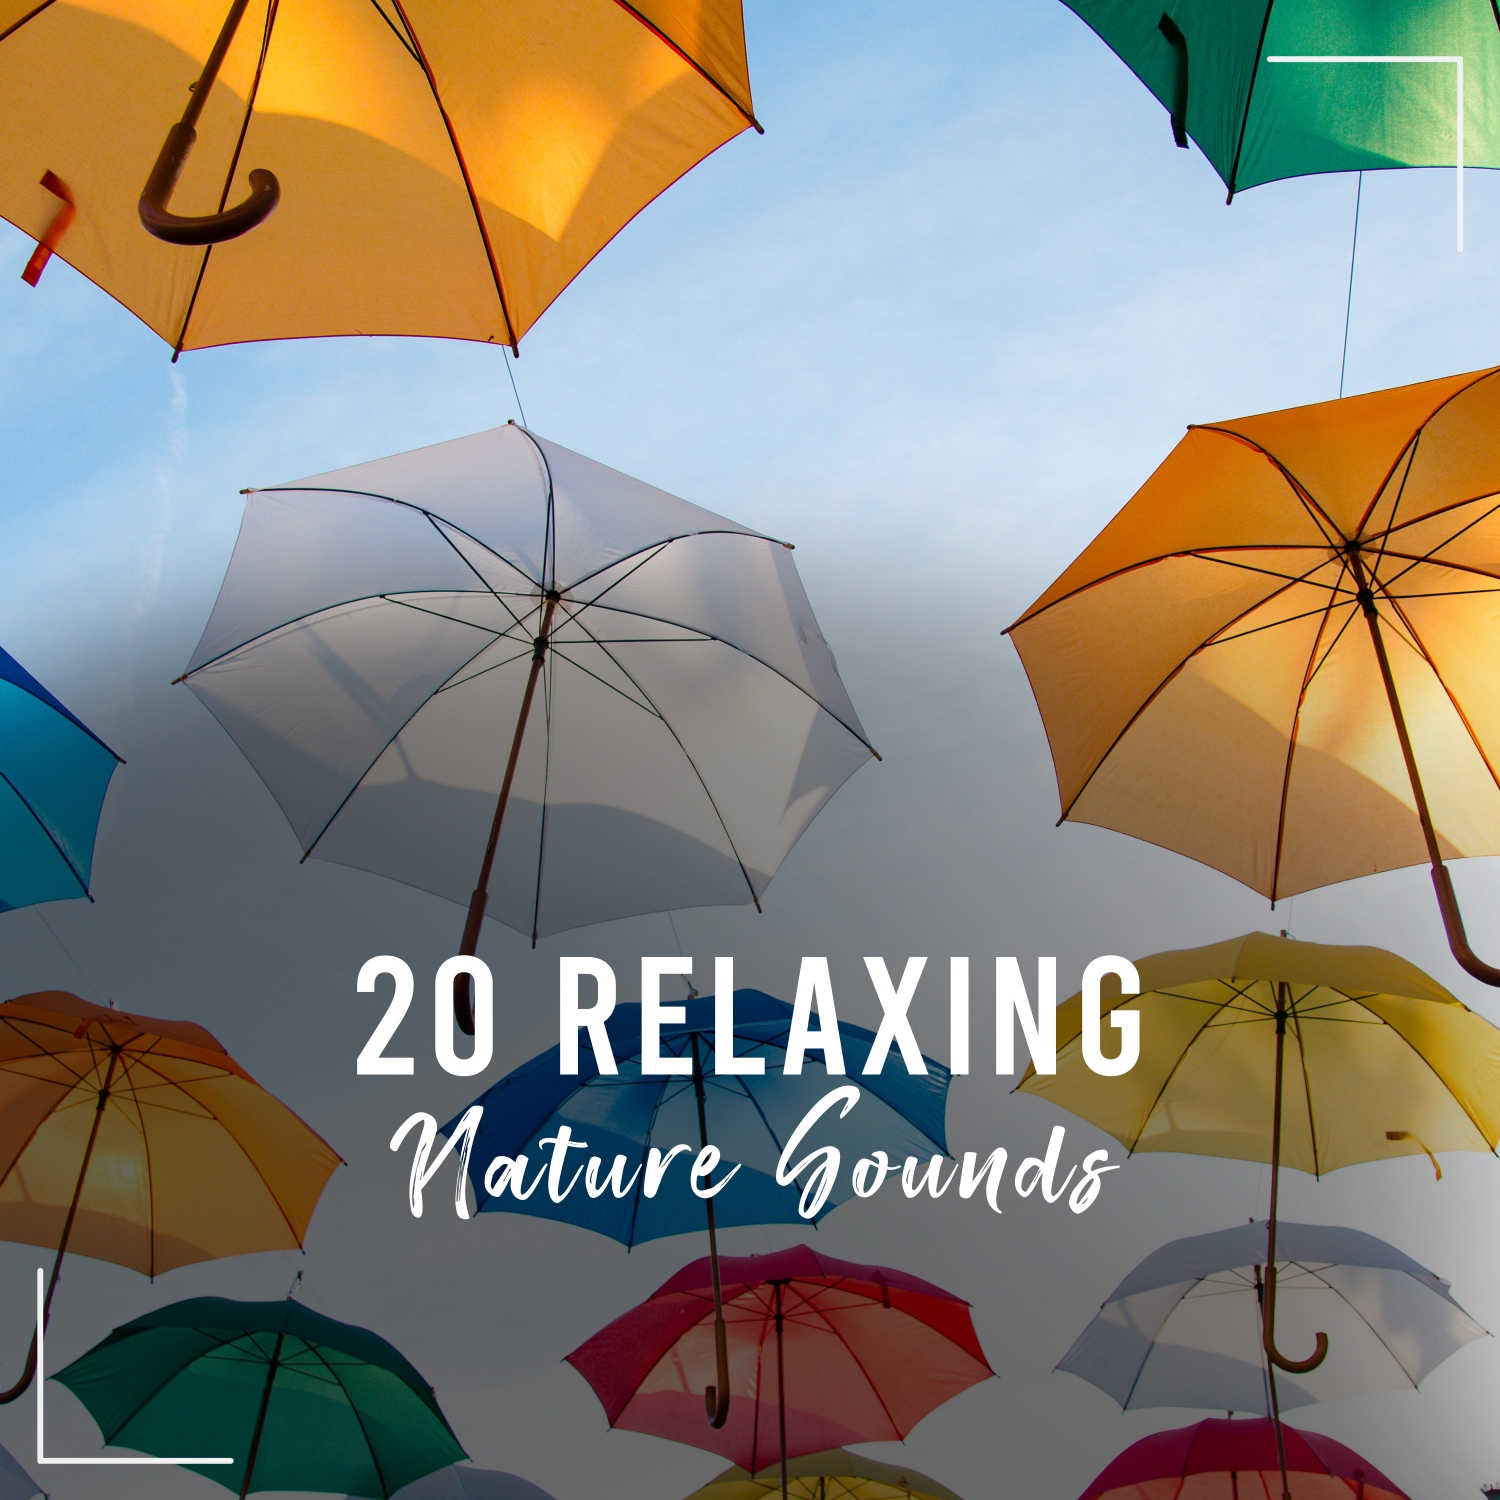 20 Relaxing Nature Sounds